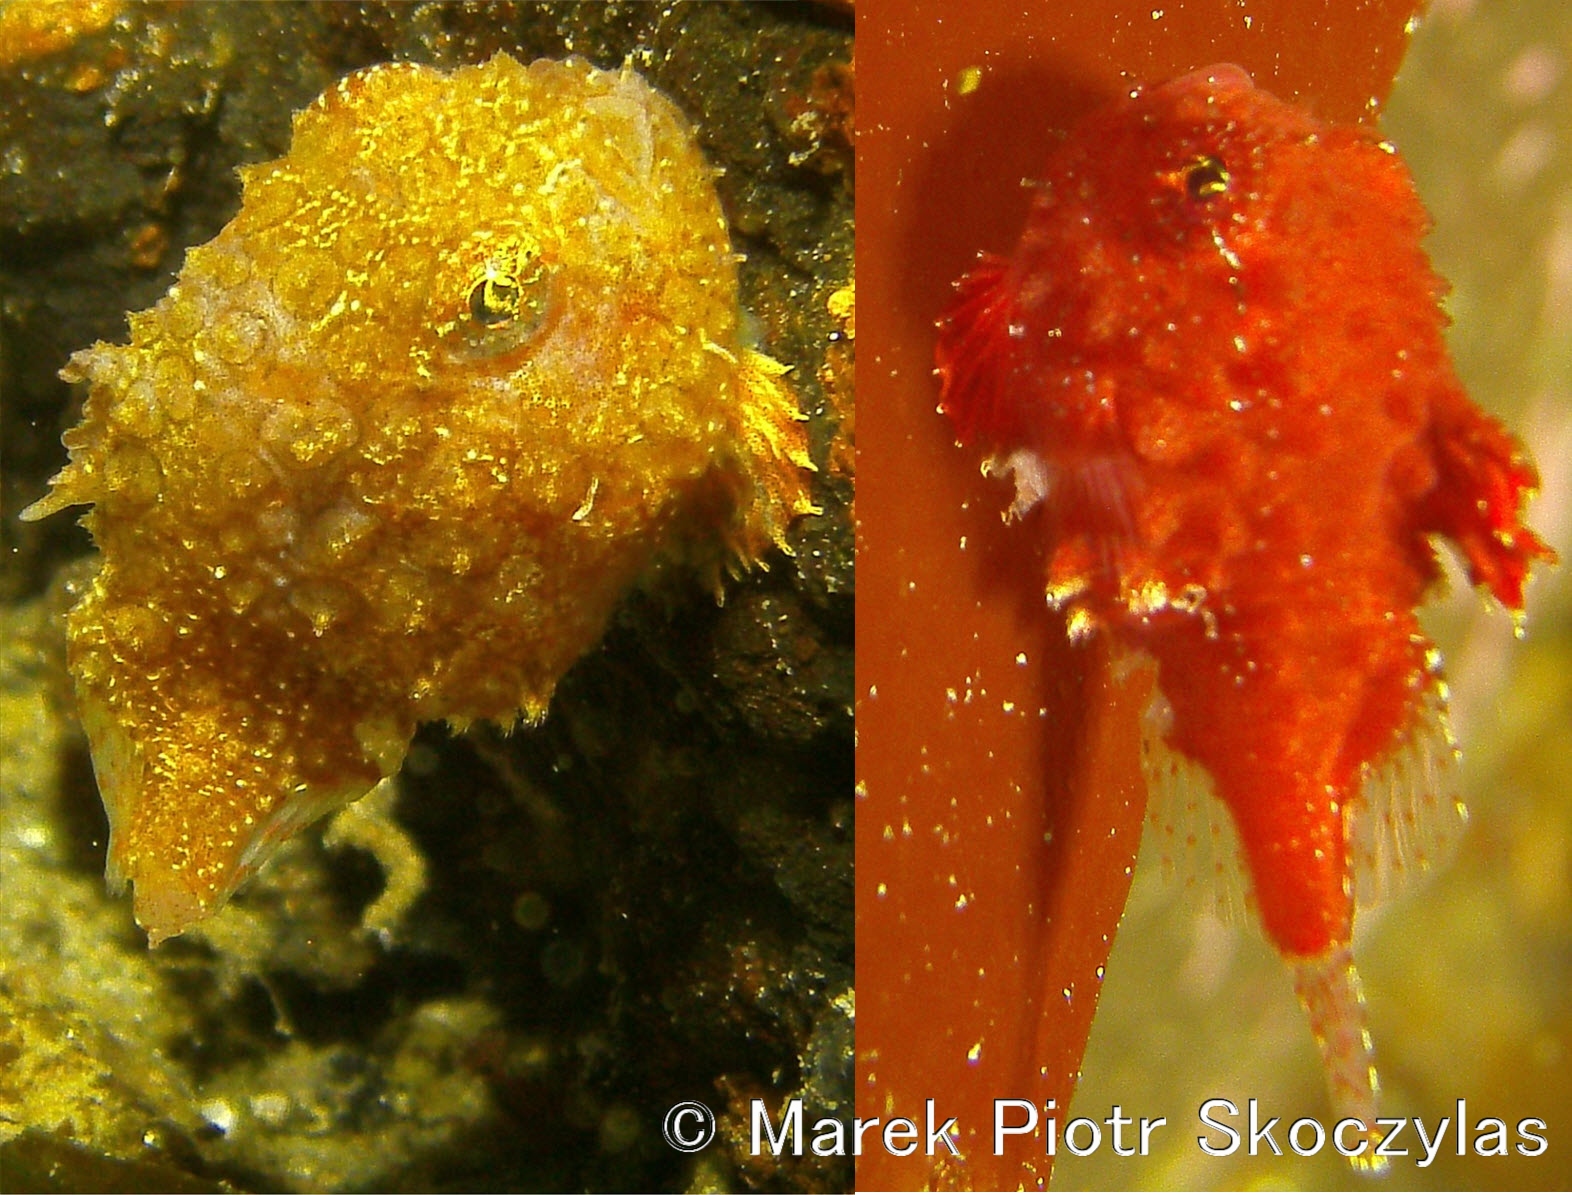 I recently started publishing on-line my over 44 thousand picture database of Puget Sound Critters organized by Species. The work has just begun. Flatfish & Rockfish part is completed plus some selected critters like Pacific Spiny Lumpsuckers (Little Cuties) and Puget Sound King Crabs. This work will continue at least for 1 year. Estimated completion Q1 2017.
Here is the site:
https://mareksk.smugmug.com/